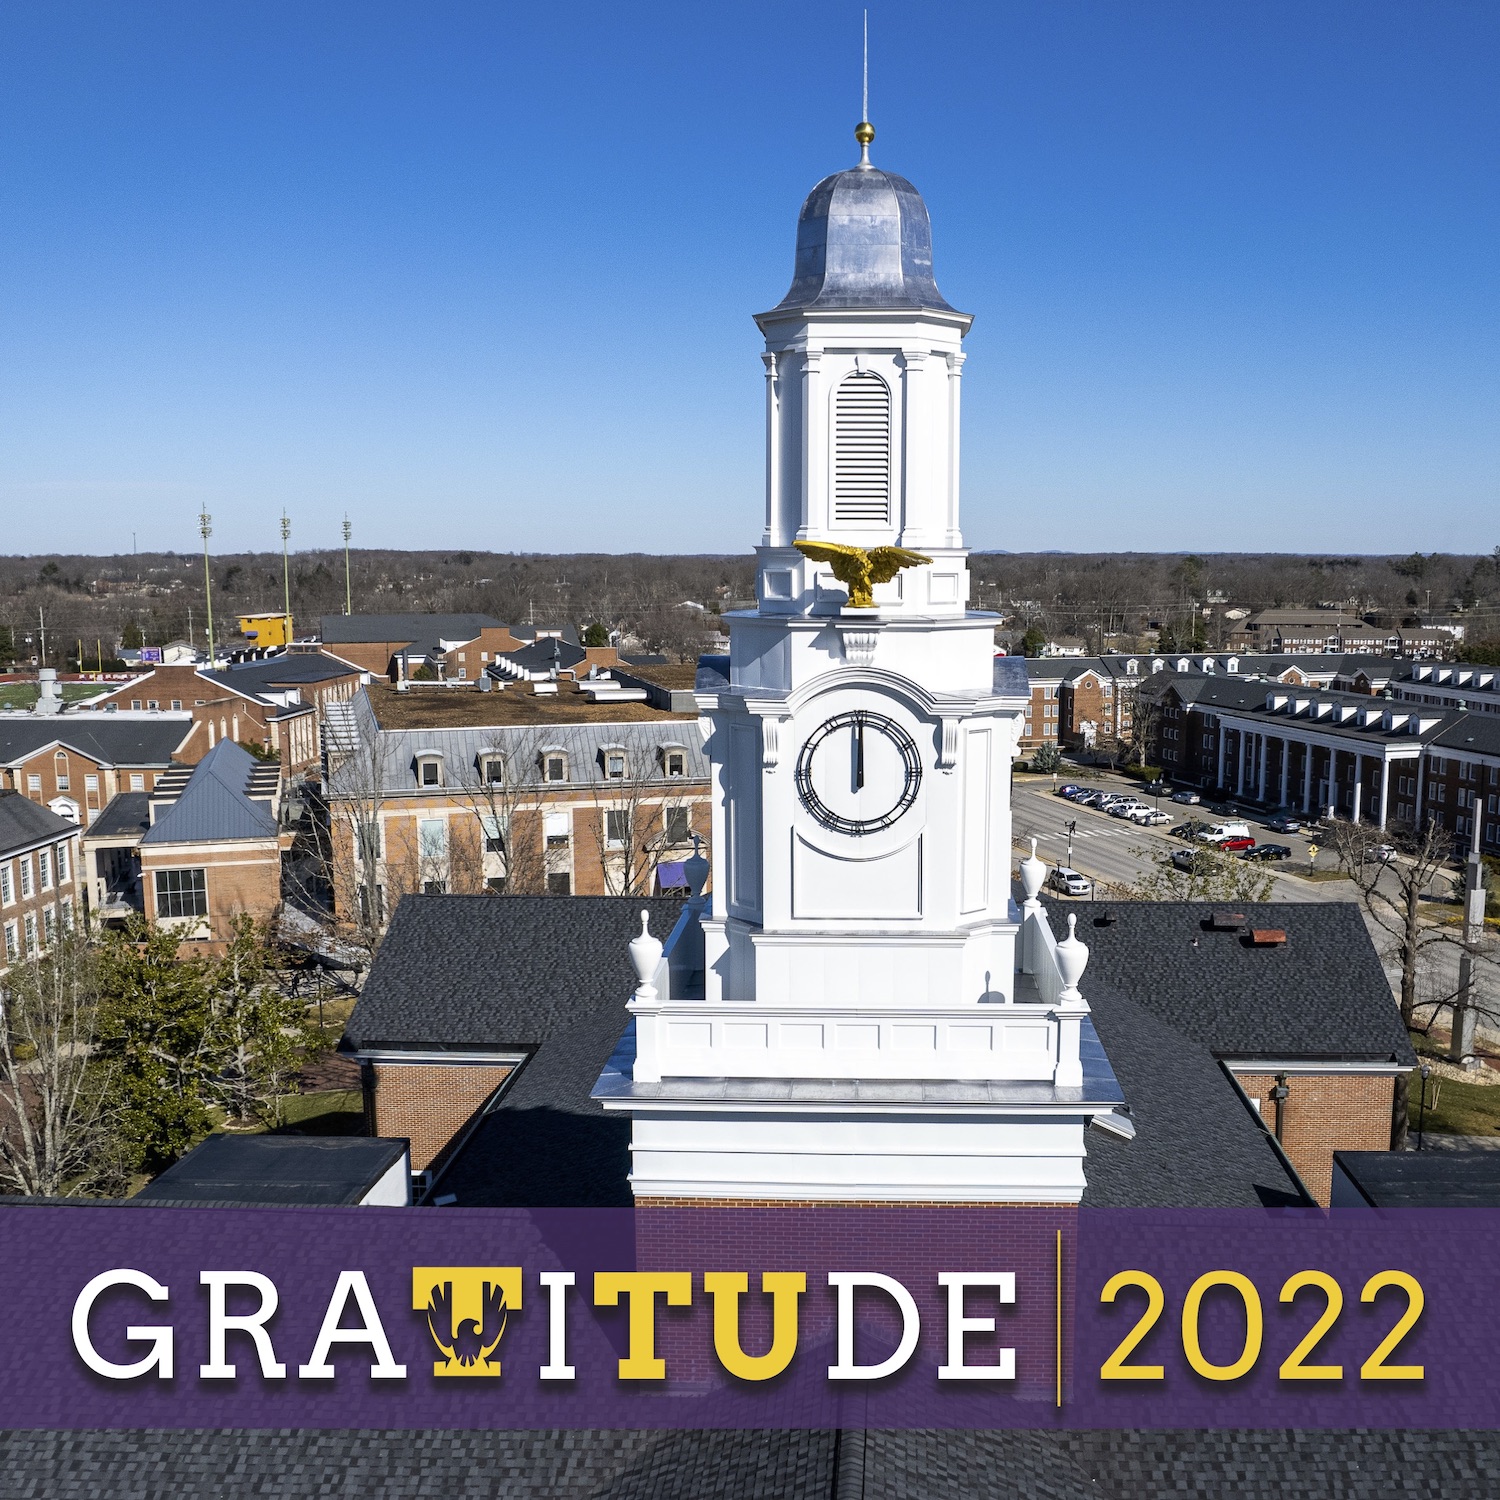 The cover of Gratitude magazine - a drone photo of the cupola of Derryberry Hall